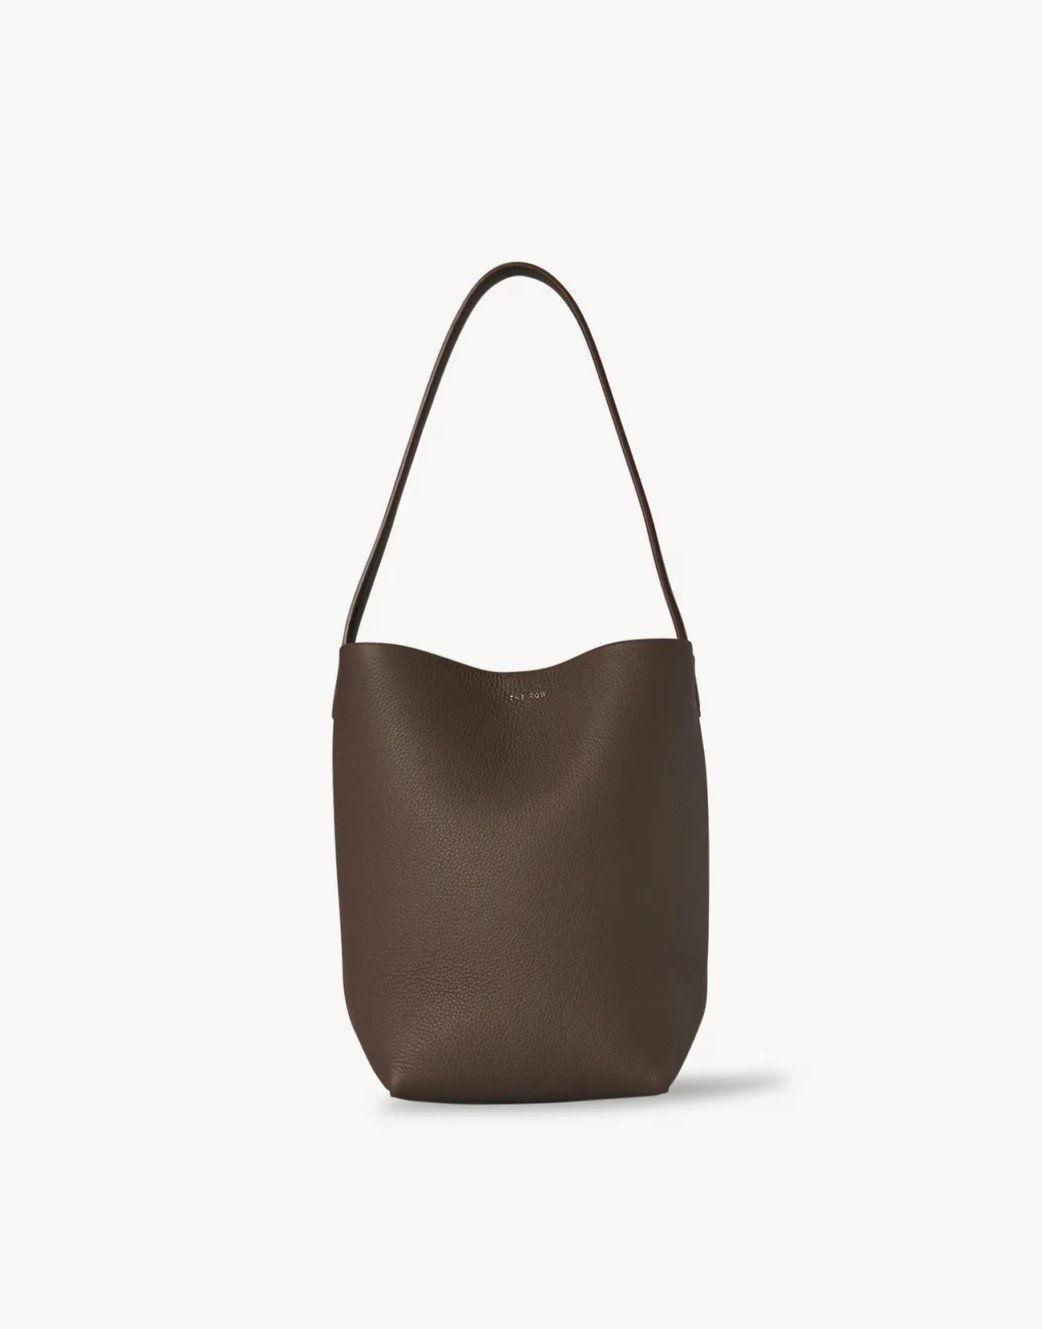 The Row Small NS Park Tote in Brown Leather.jpg